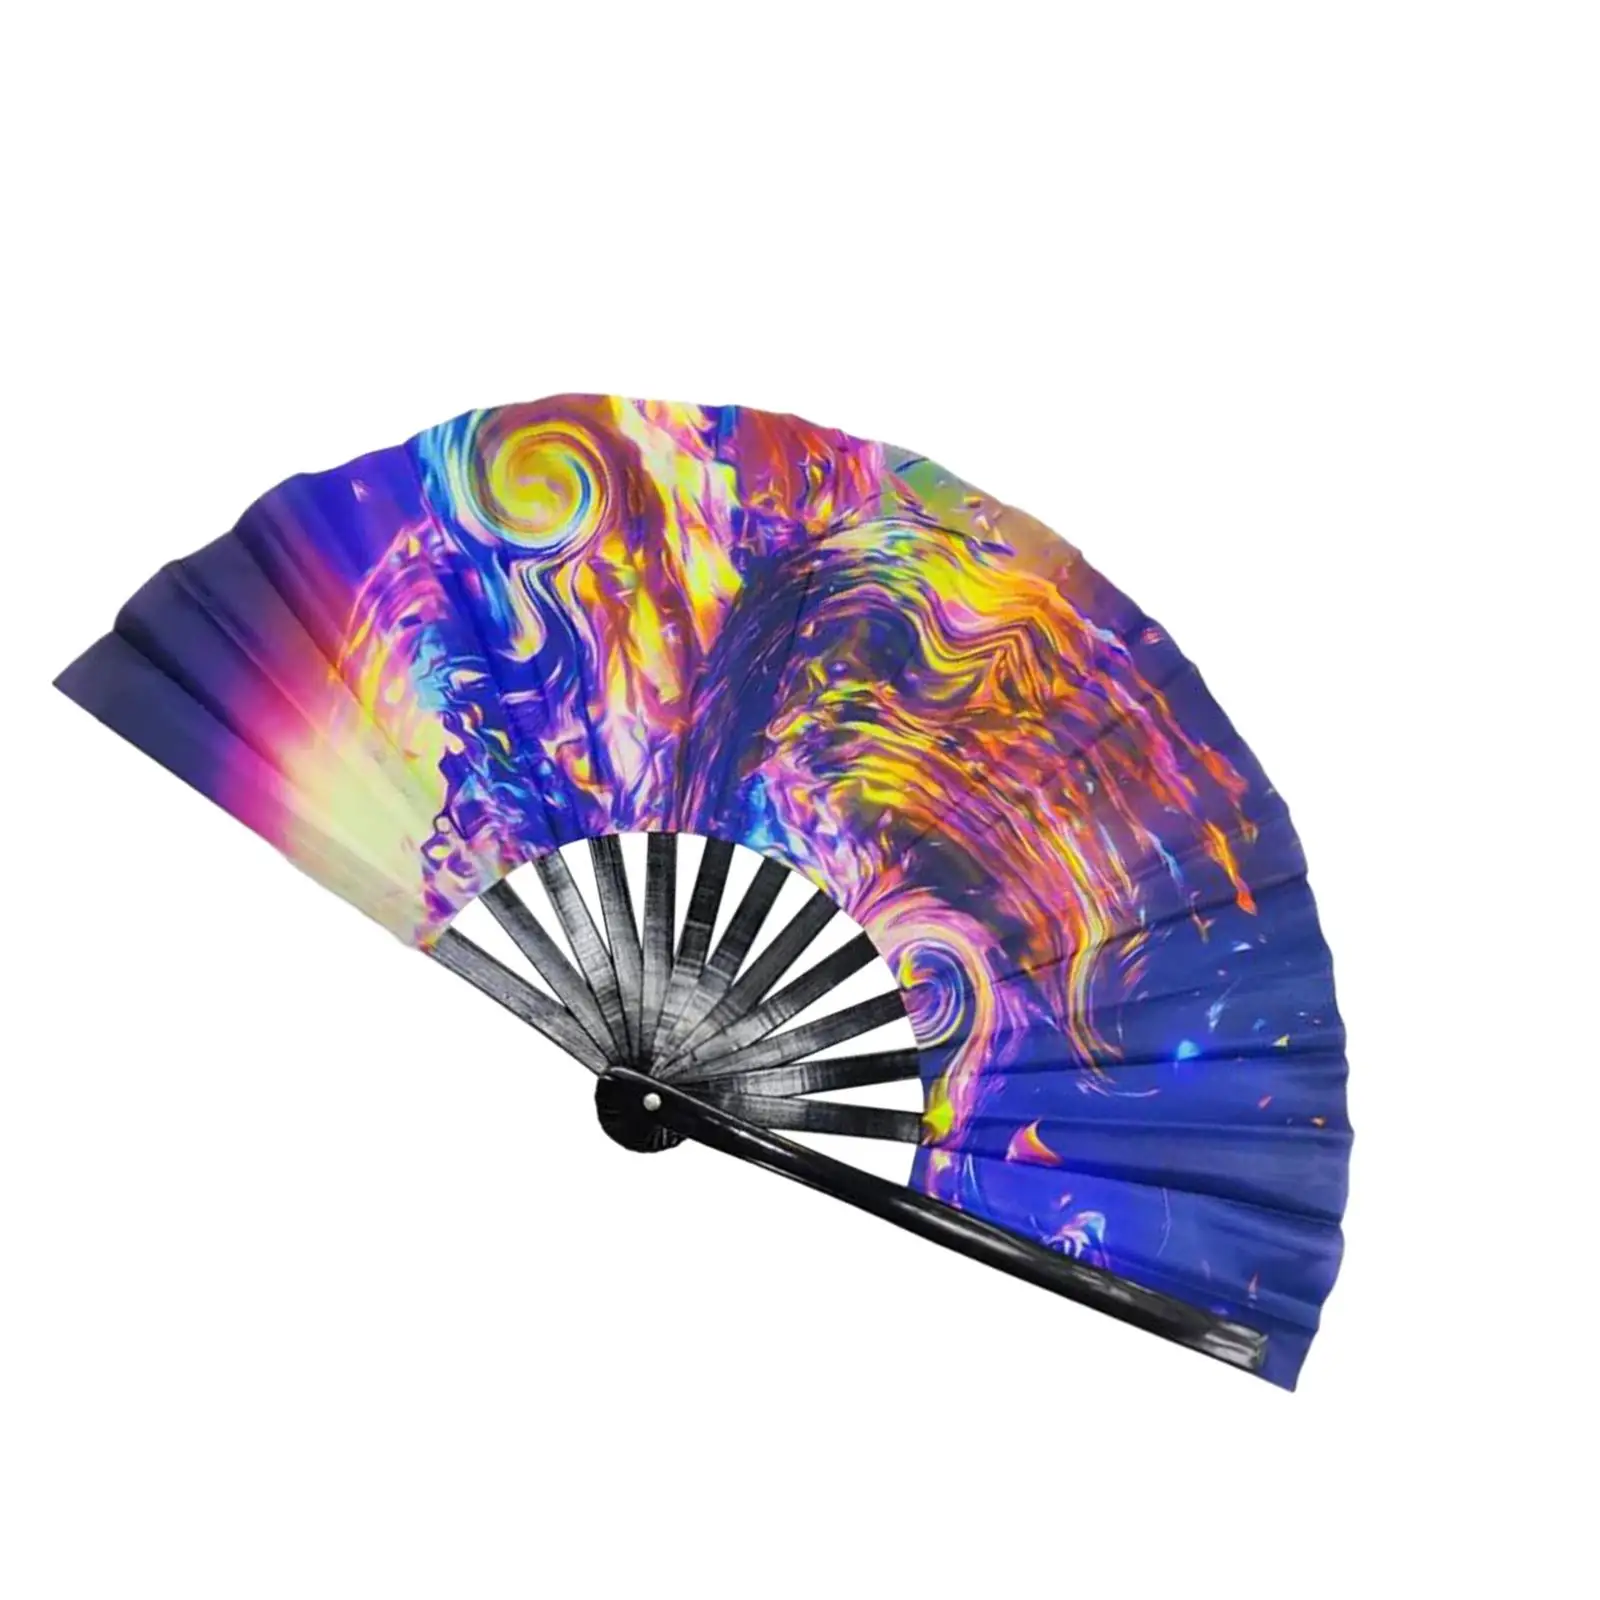 Large Rave Folding Hand Fan Fluorescent Effects Unisex Cosplay Folding Fan for Gift Martial Arts Fans Parties Roles Play Wedding